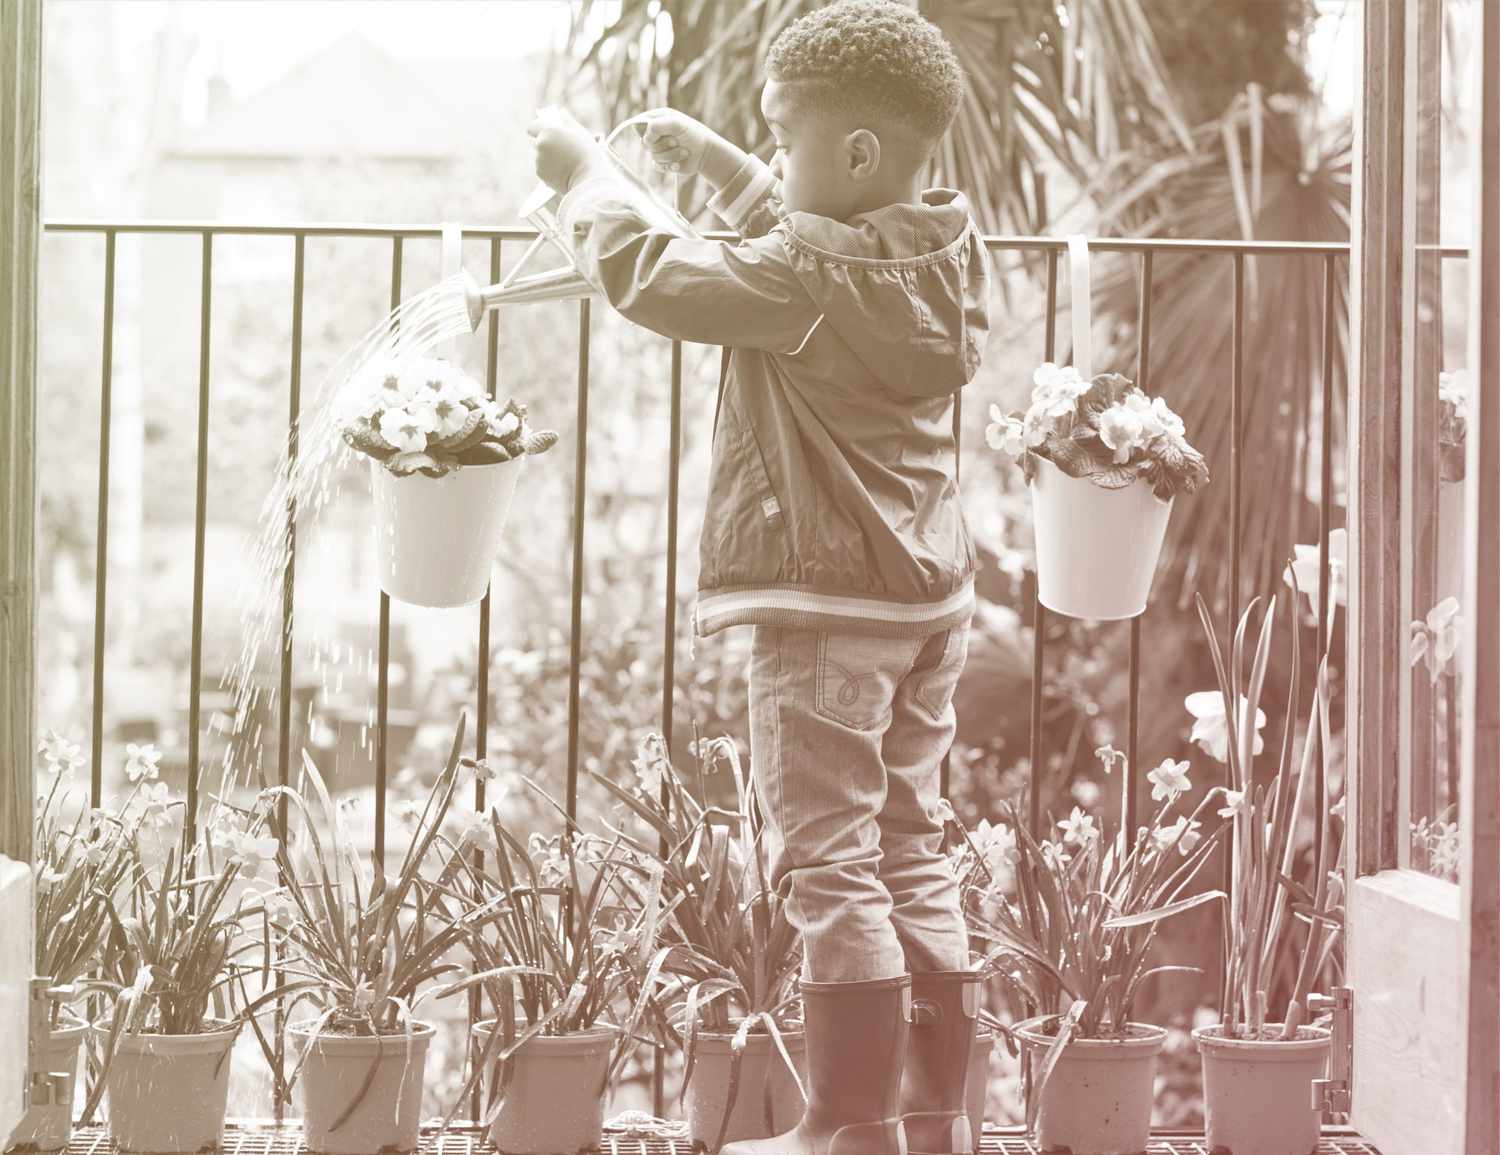 young boy watering potted plants on balcony